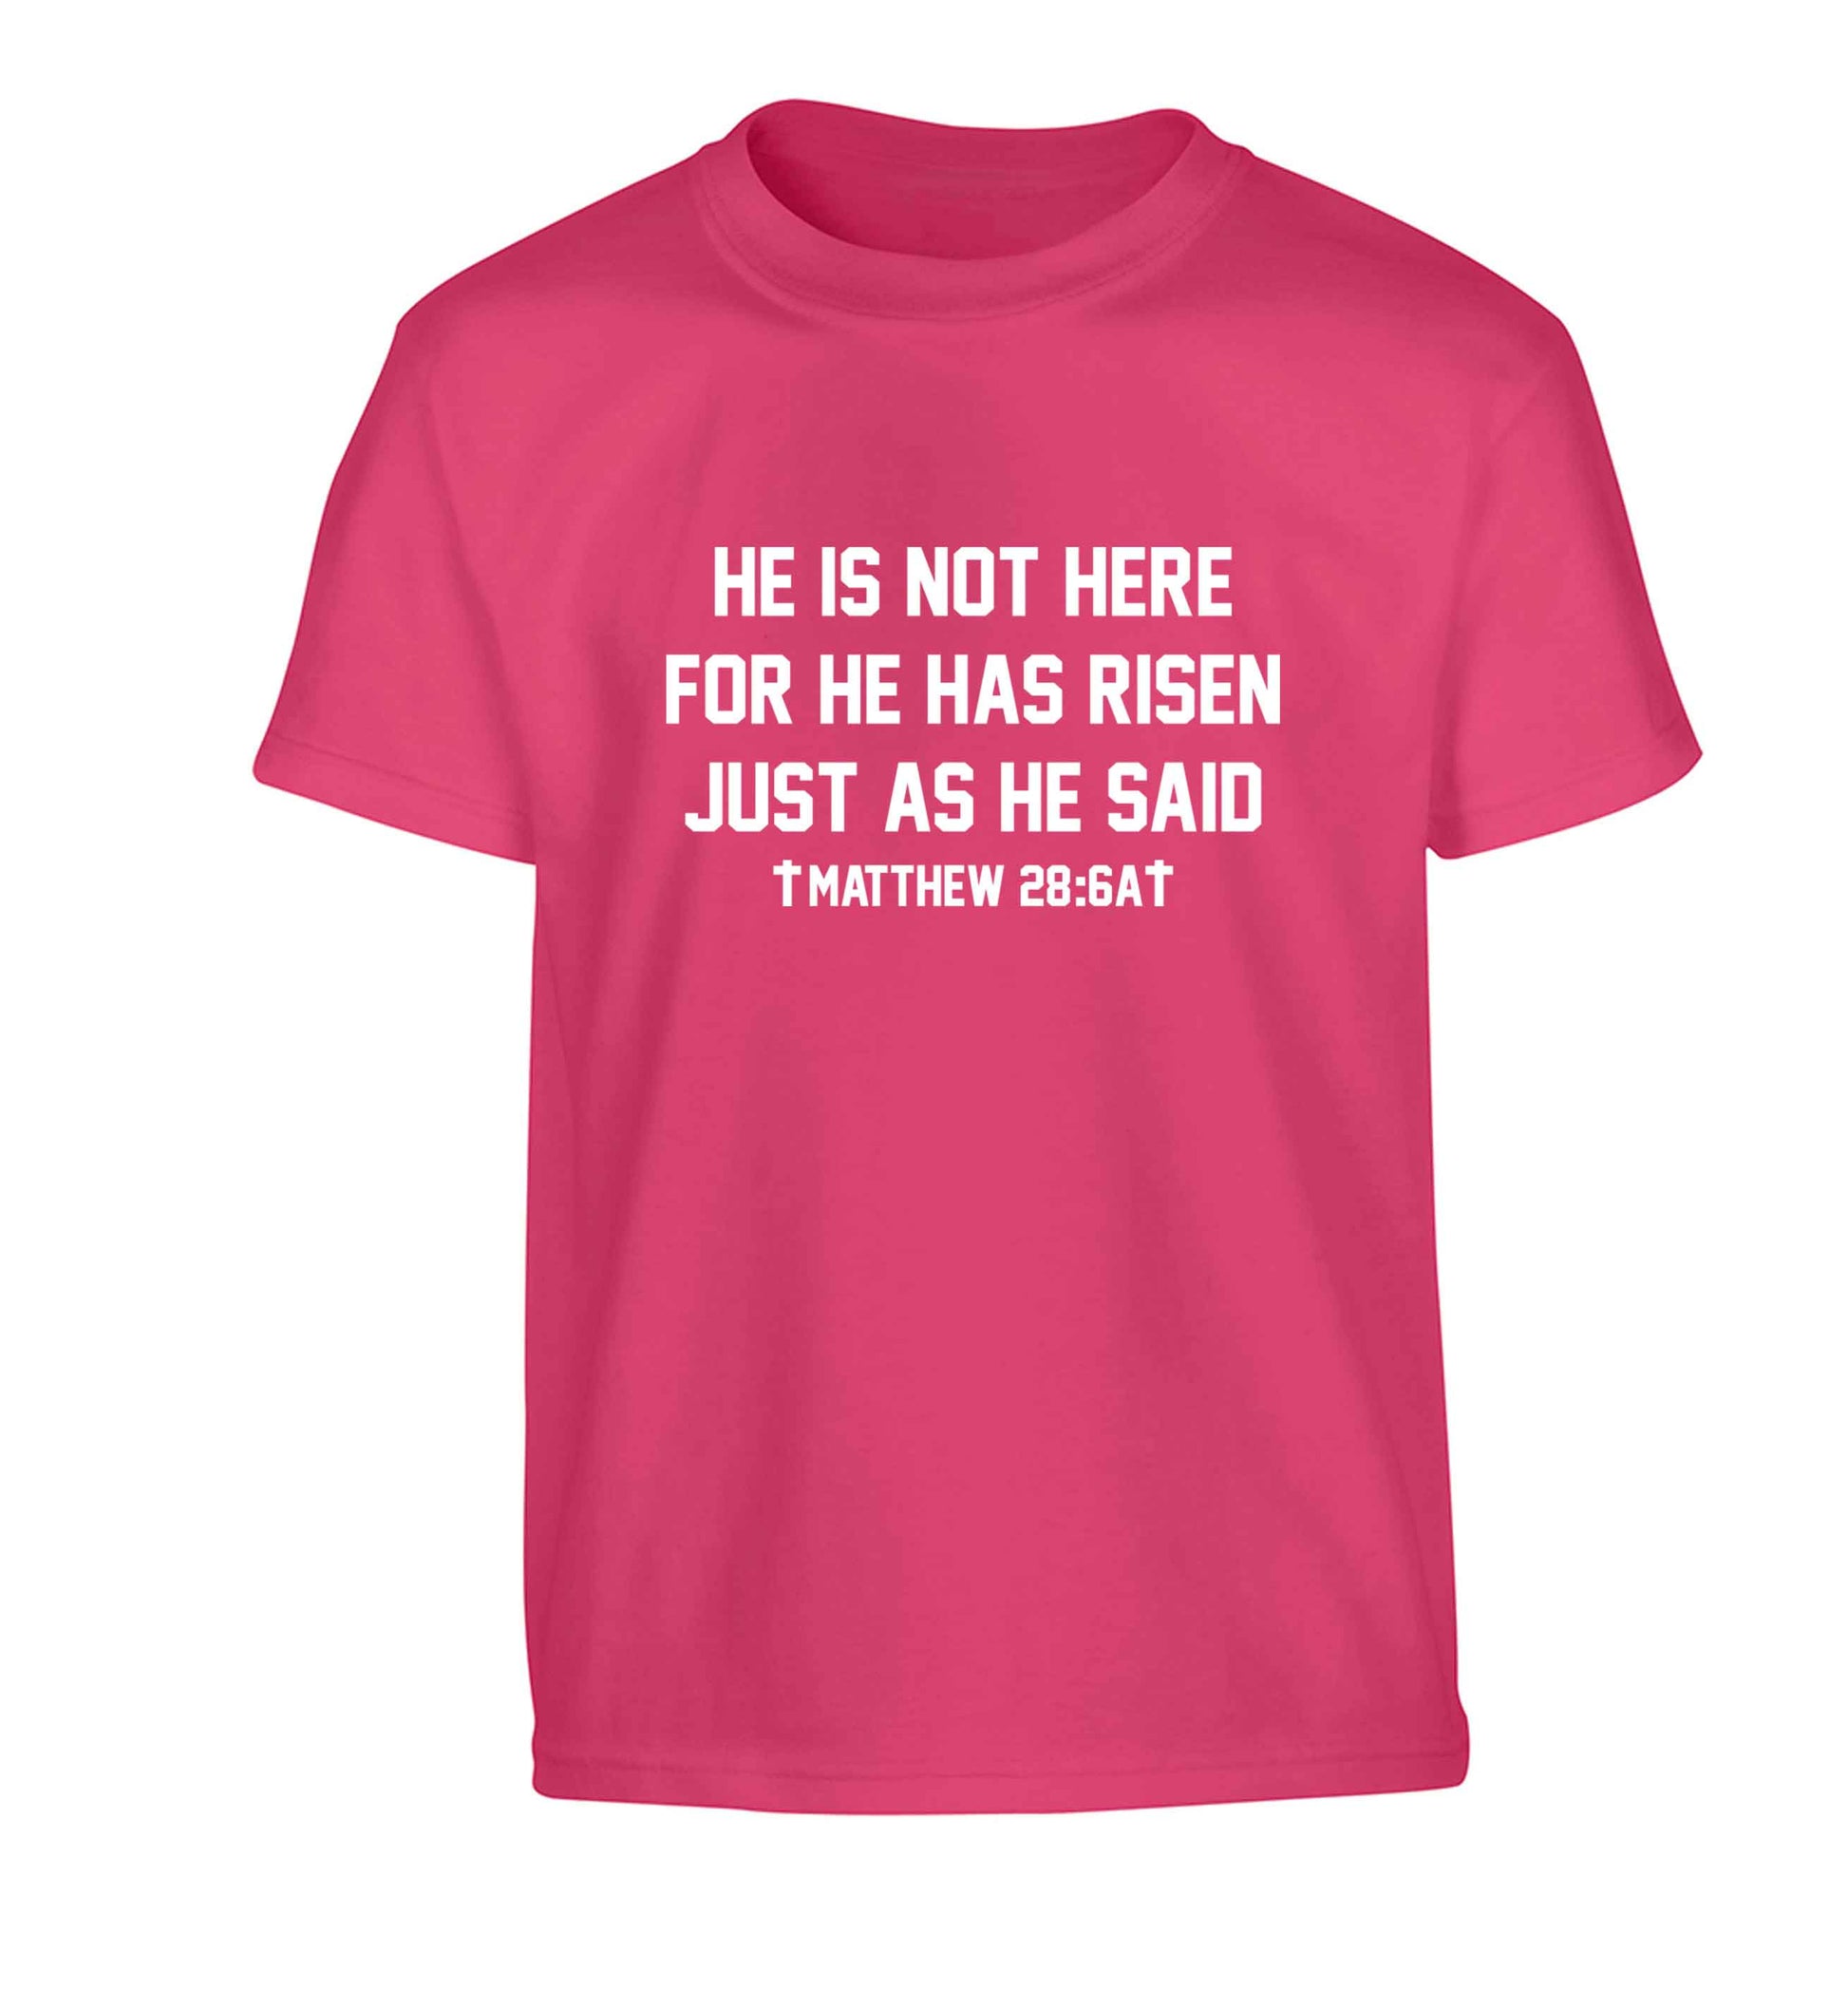 He is not here for he has risen just as he said matthew 28:6A Children's pink Tshirt 12-13 Years